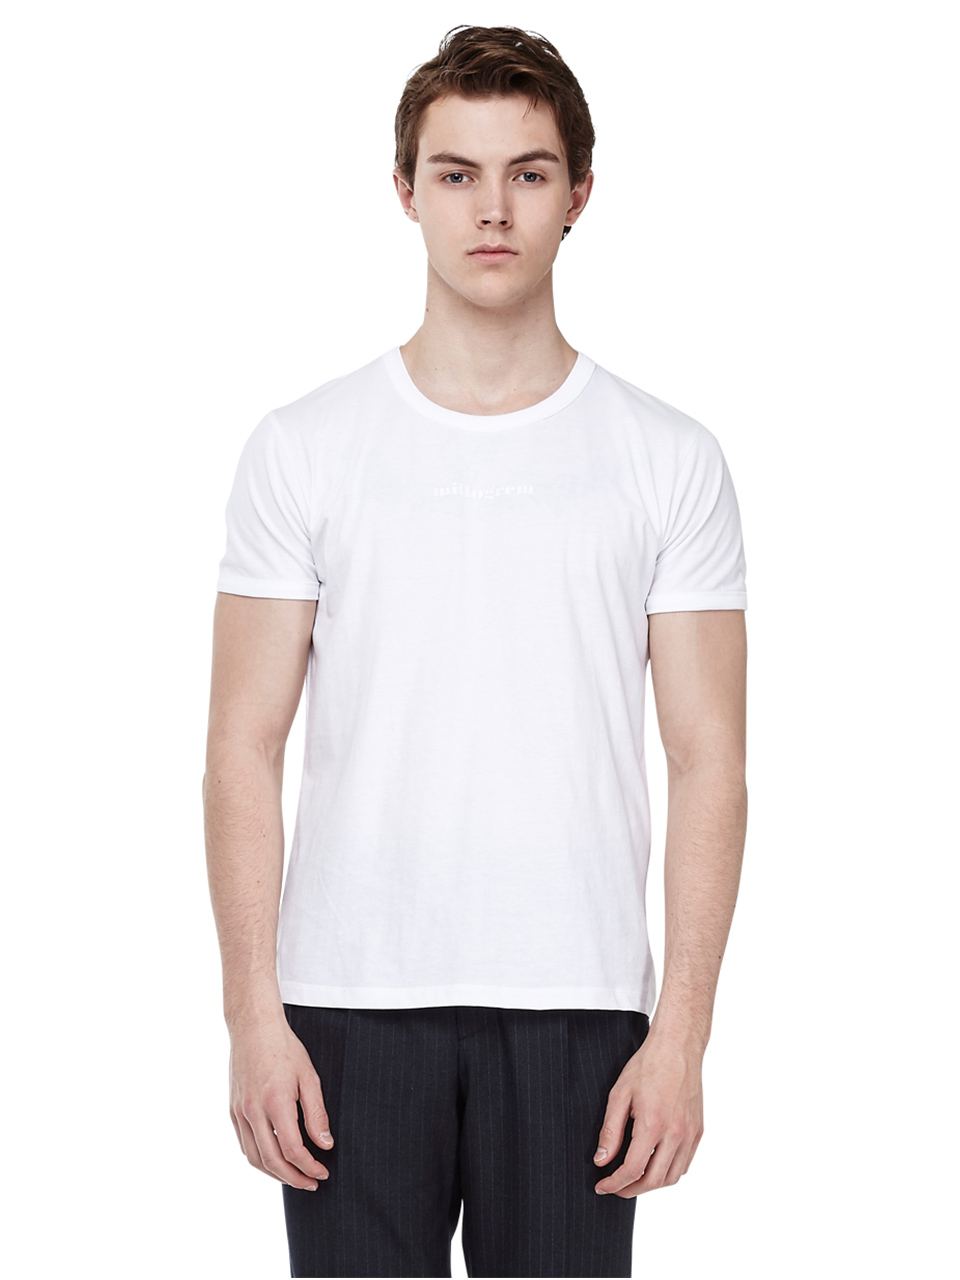 Guy fit t-shirts - White